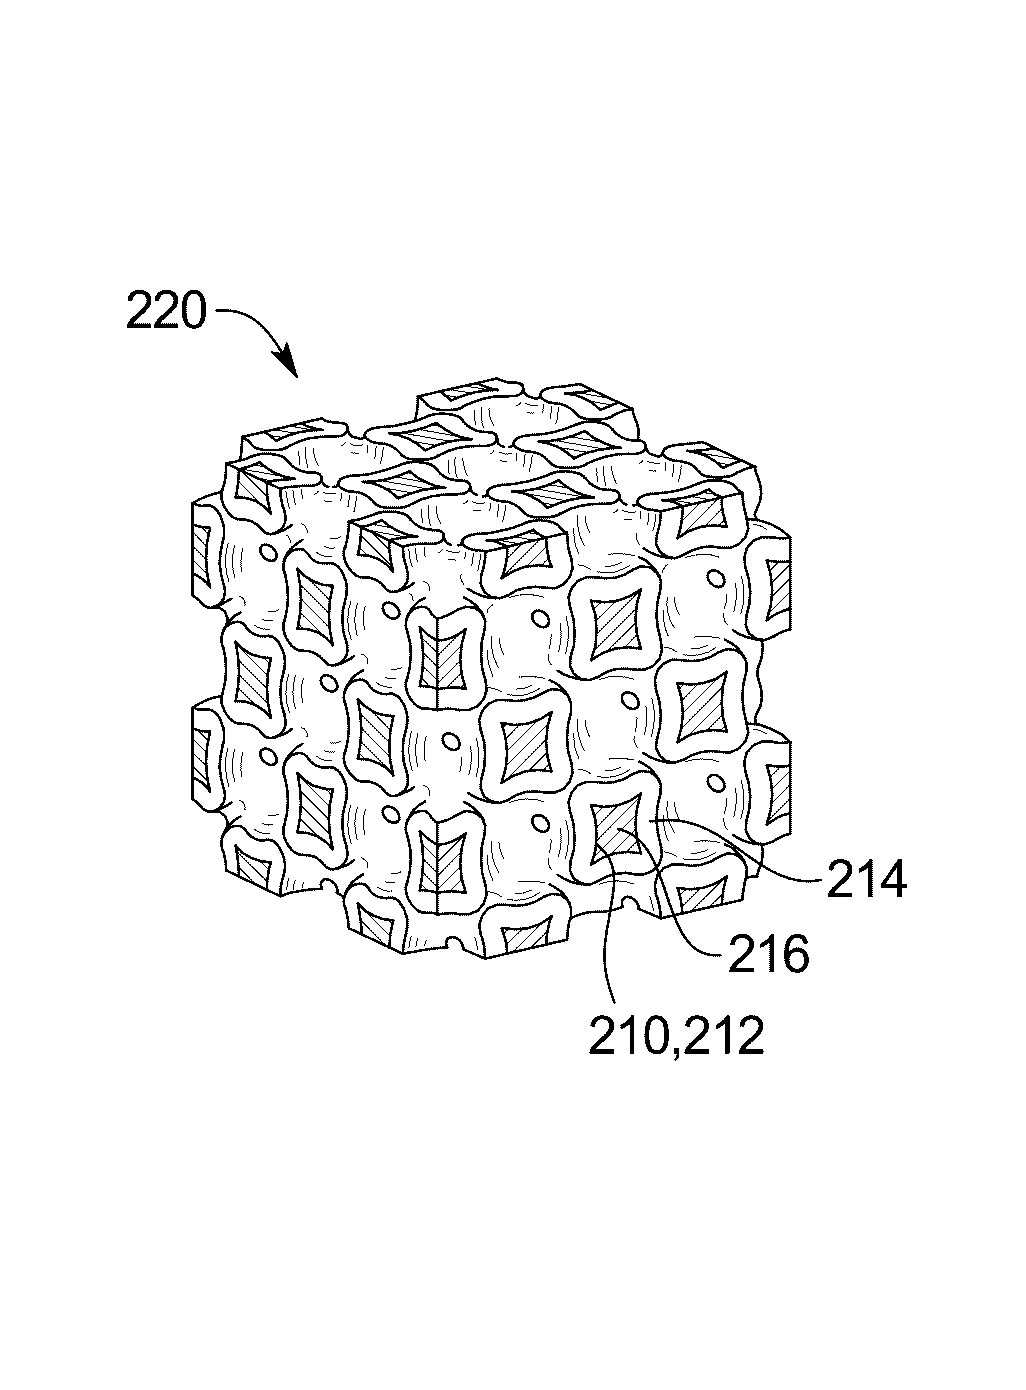 Scaffold-free 3D porous electrode and method of making a scaffold-free 3D porous electrode